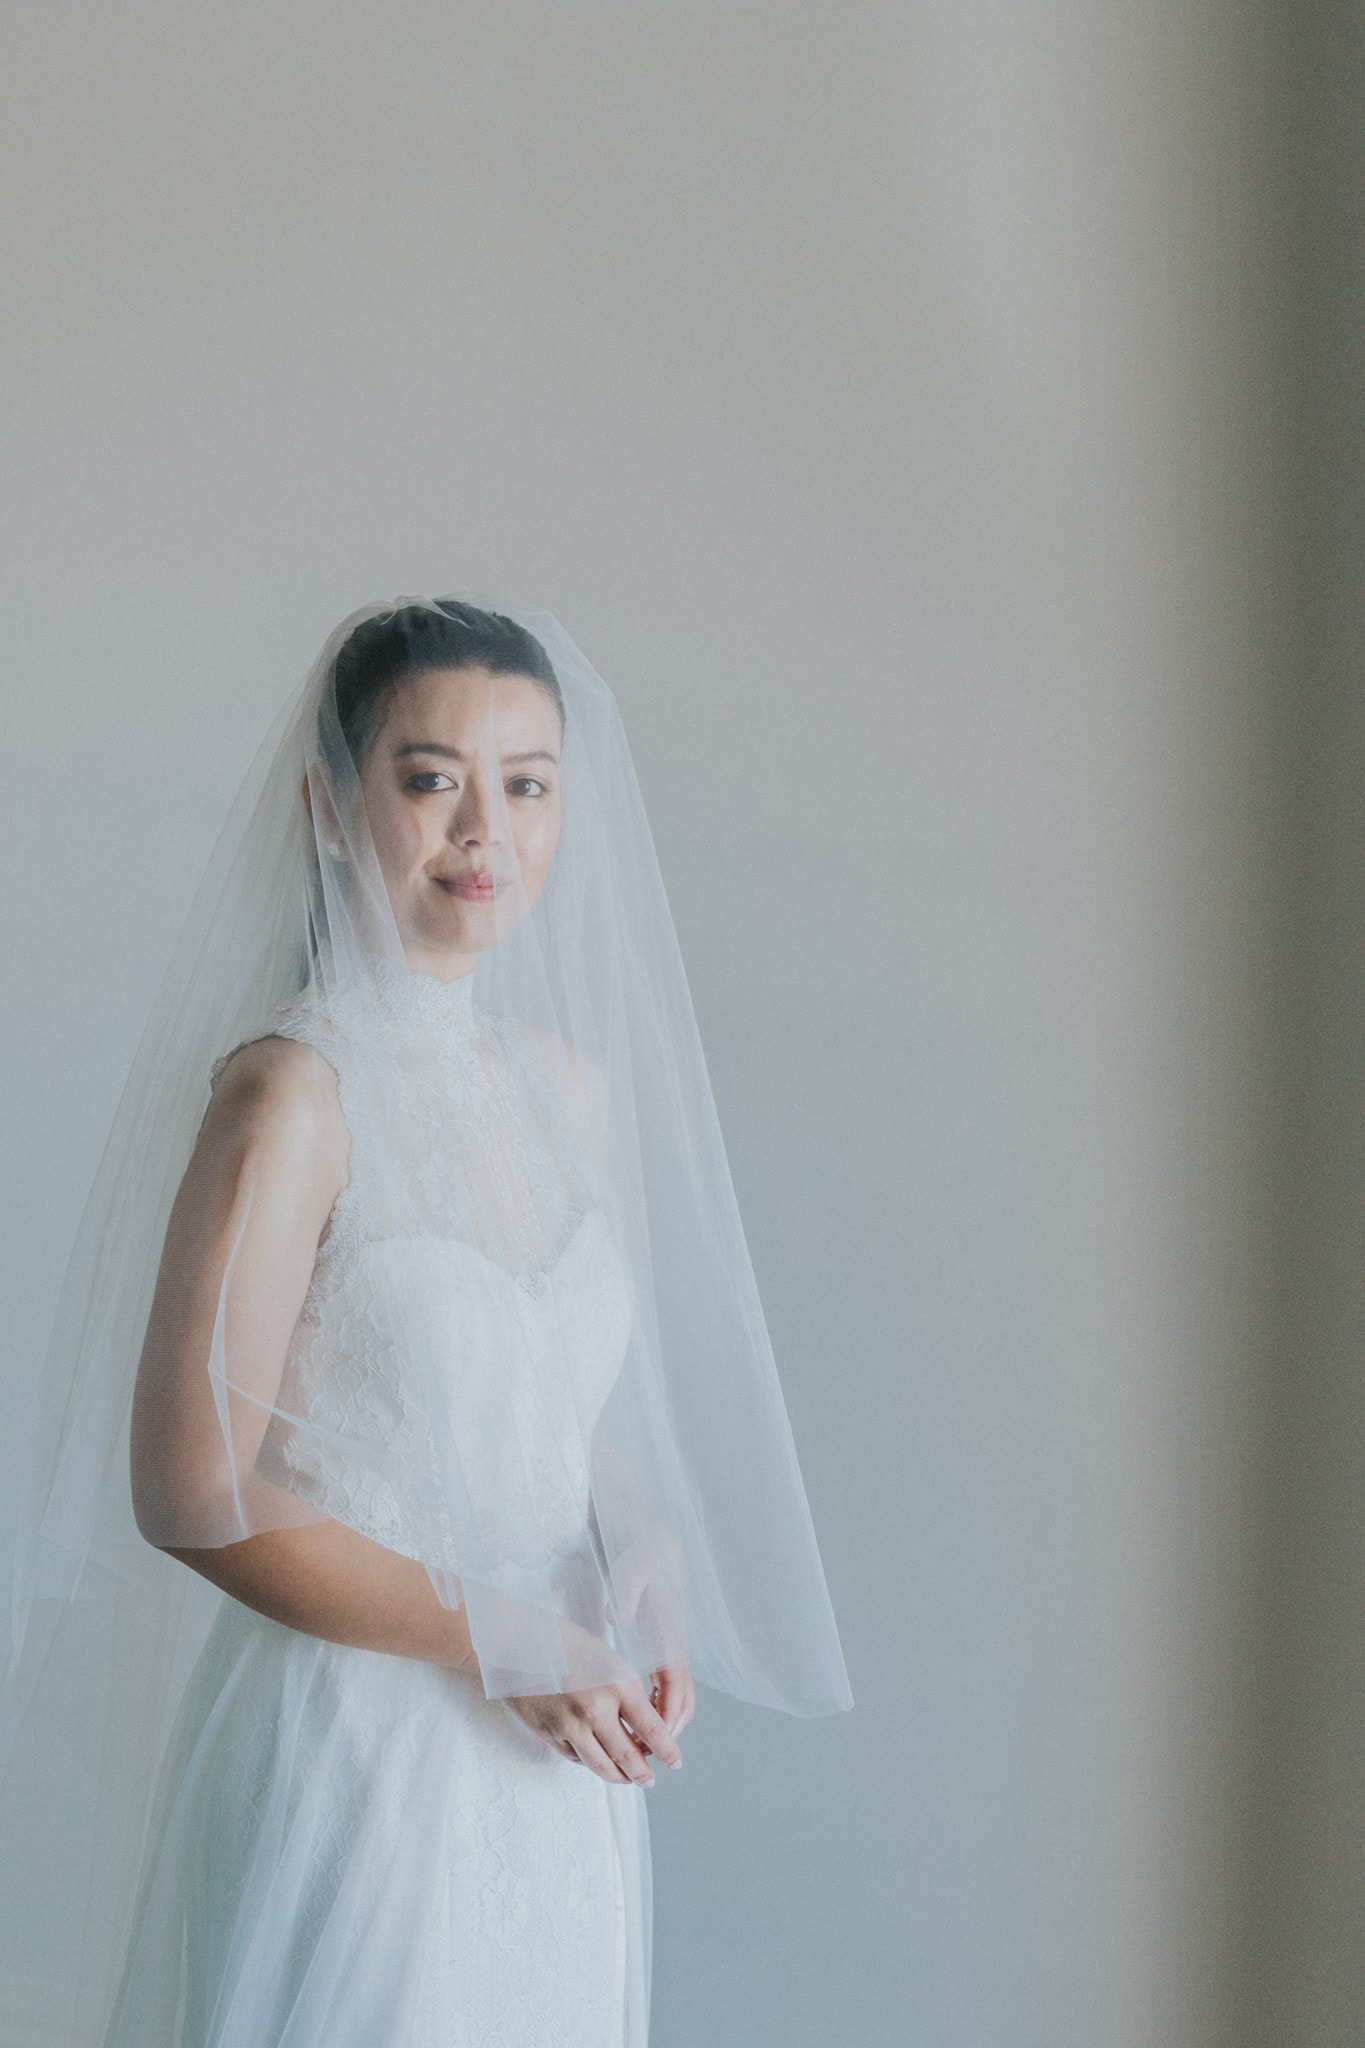 bridal photos in hawthorn, melbourne - best photos by photojournalistic wedding photographer - creative and candid approach